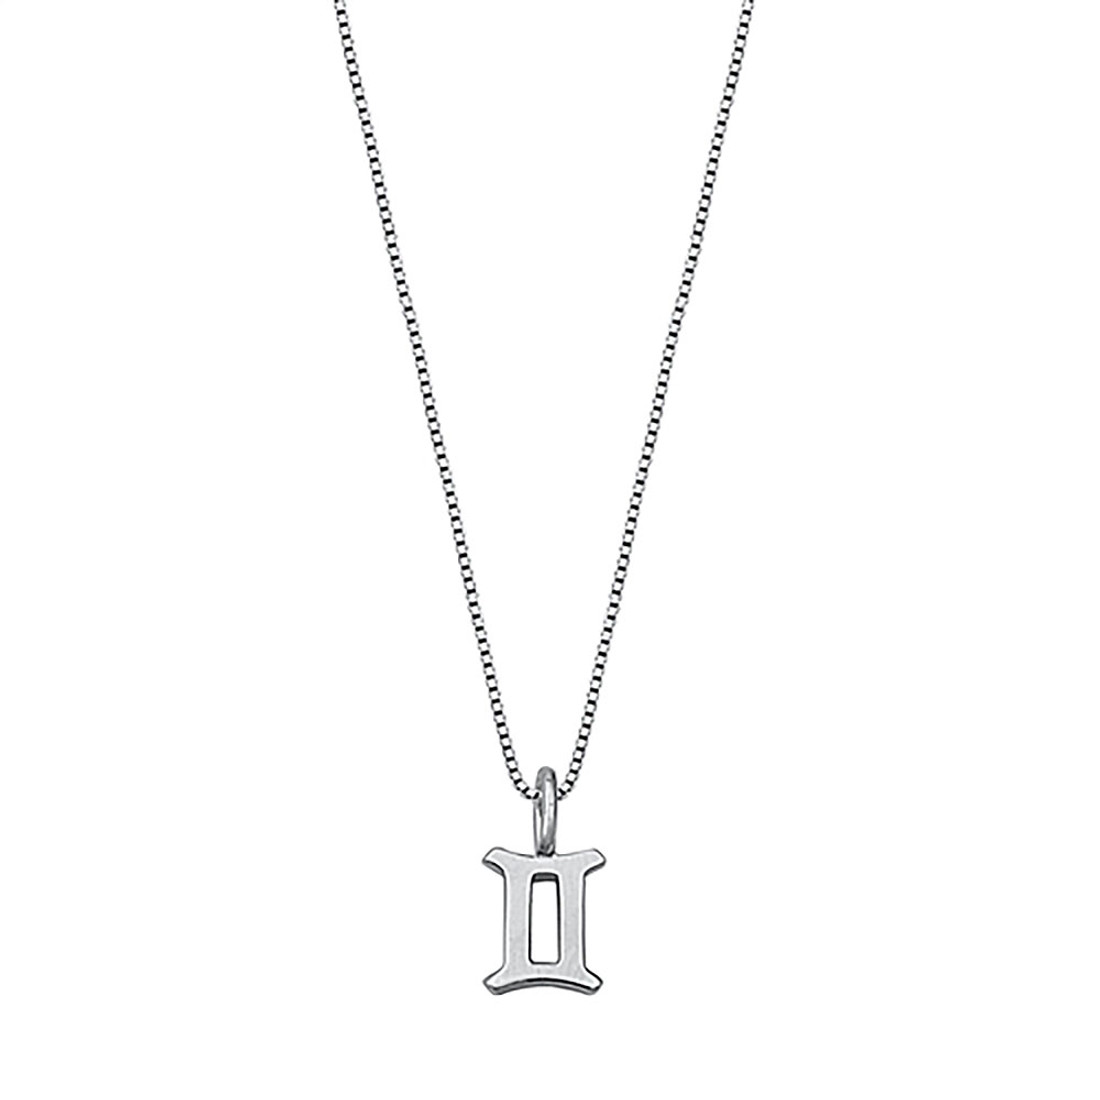 Sterling silver Gemini pendant and chain necklace. 